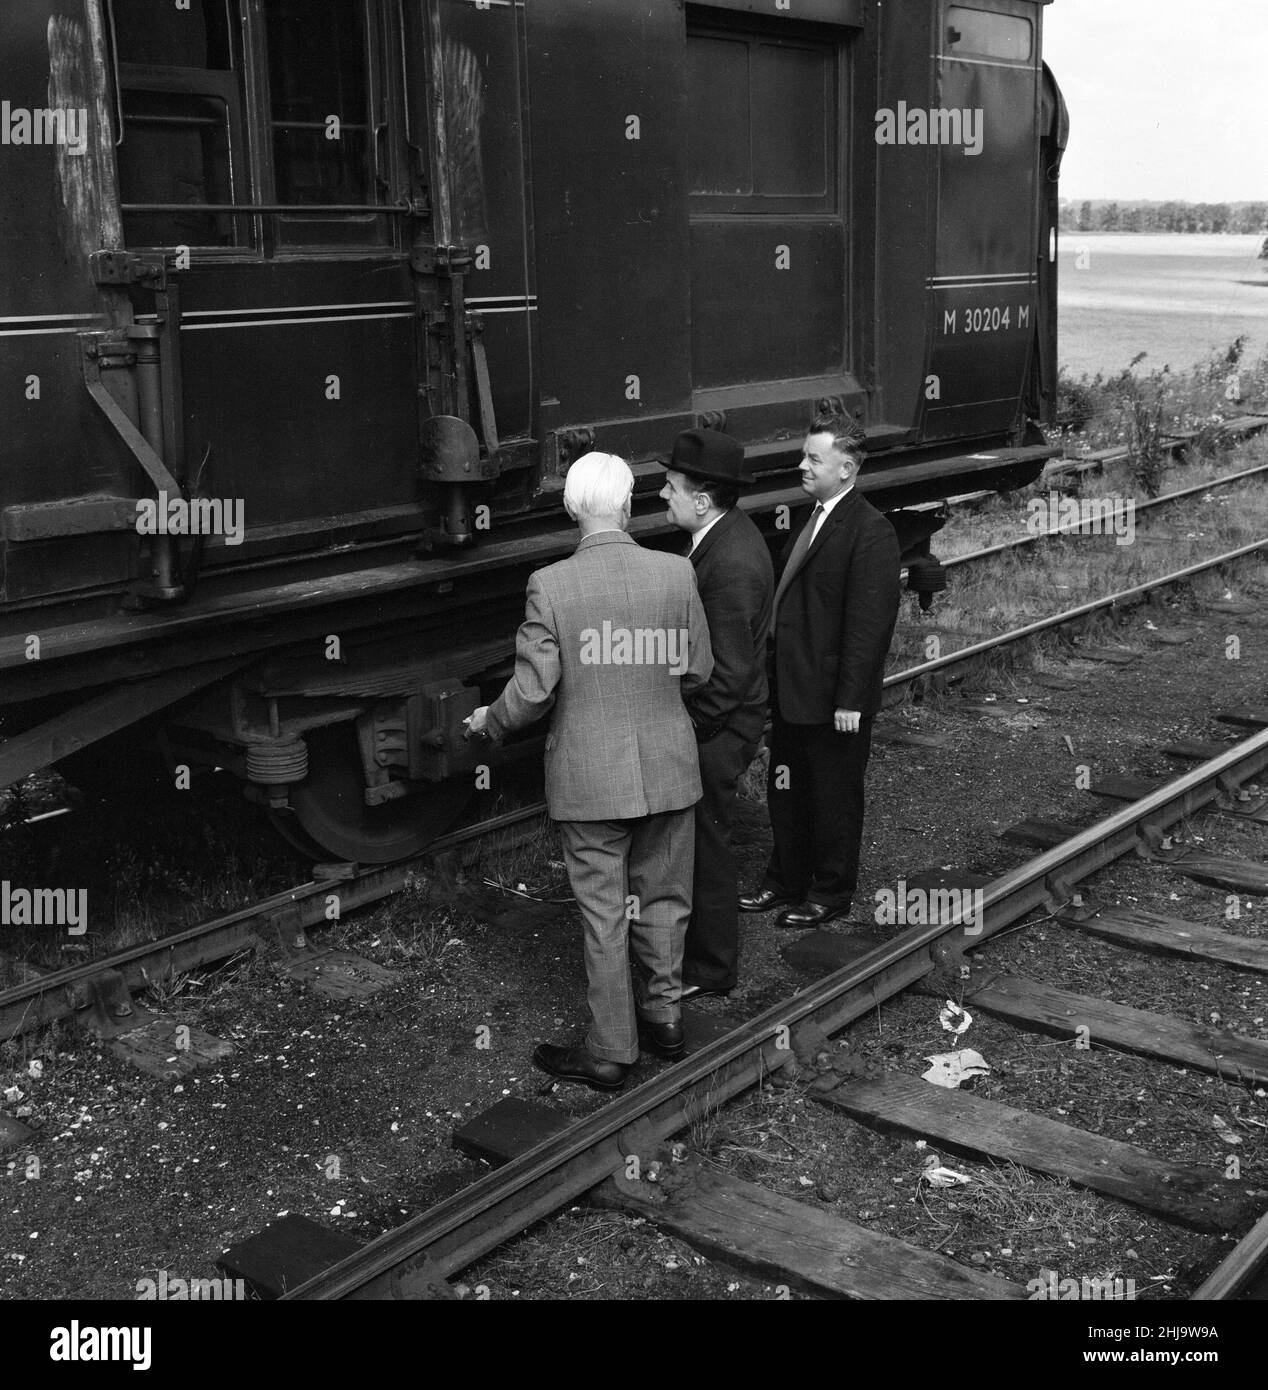 1963 Great Train Robbery was the robbery of £2.6 million from a Royal Mail train heading from Glasgow to London on the West Coast Main Line in the early hours of 8th August 1963, at Bridego Railway Bridge, Ledburn, near Mentmore in Buckinghamshire, England. Our Picture Shows ... Detective Superintendent Malcolm Fewtrell, Head of Buckinghamshire CID and Det. Supt. Gerald McArthur of Scotland Yard (wearing hat) examine  the mail carriage in the sidings at Cheddington Train Station, Friday 9th August 1963. Stock Photo